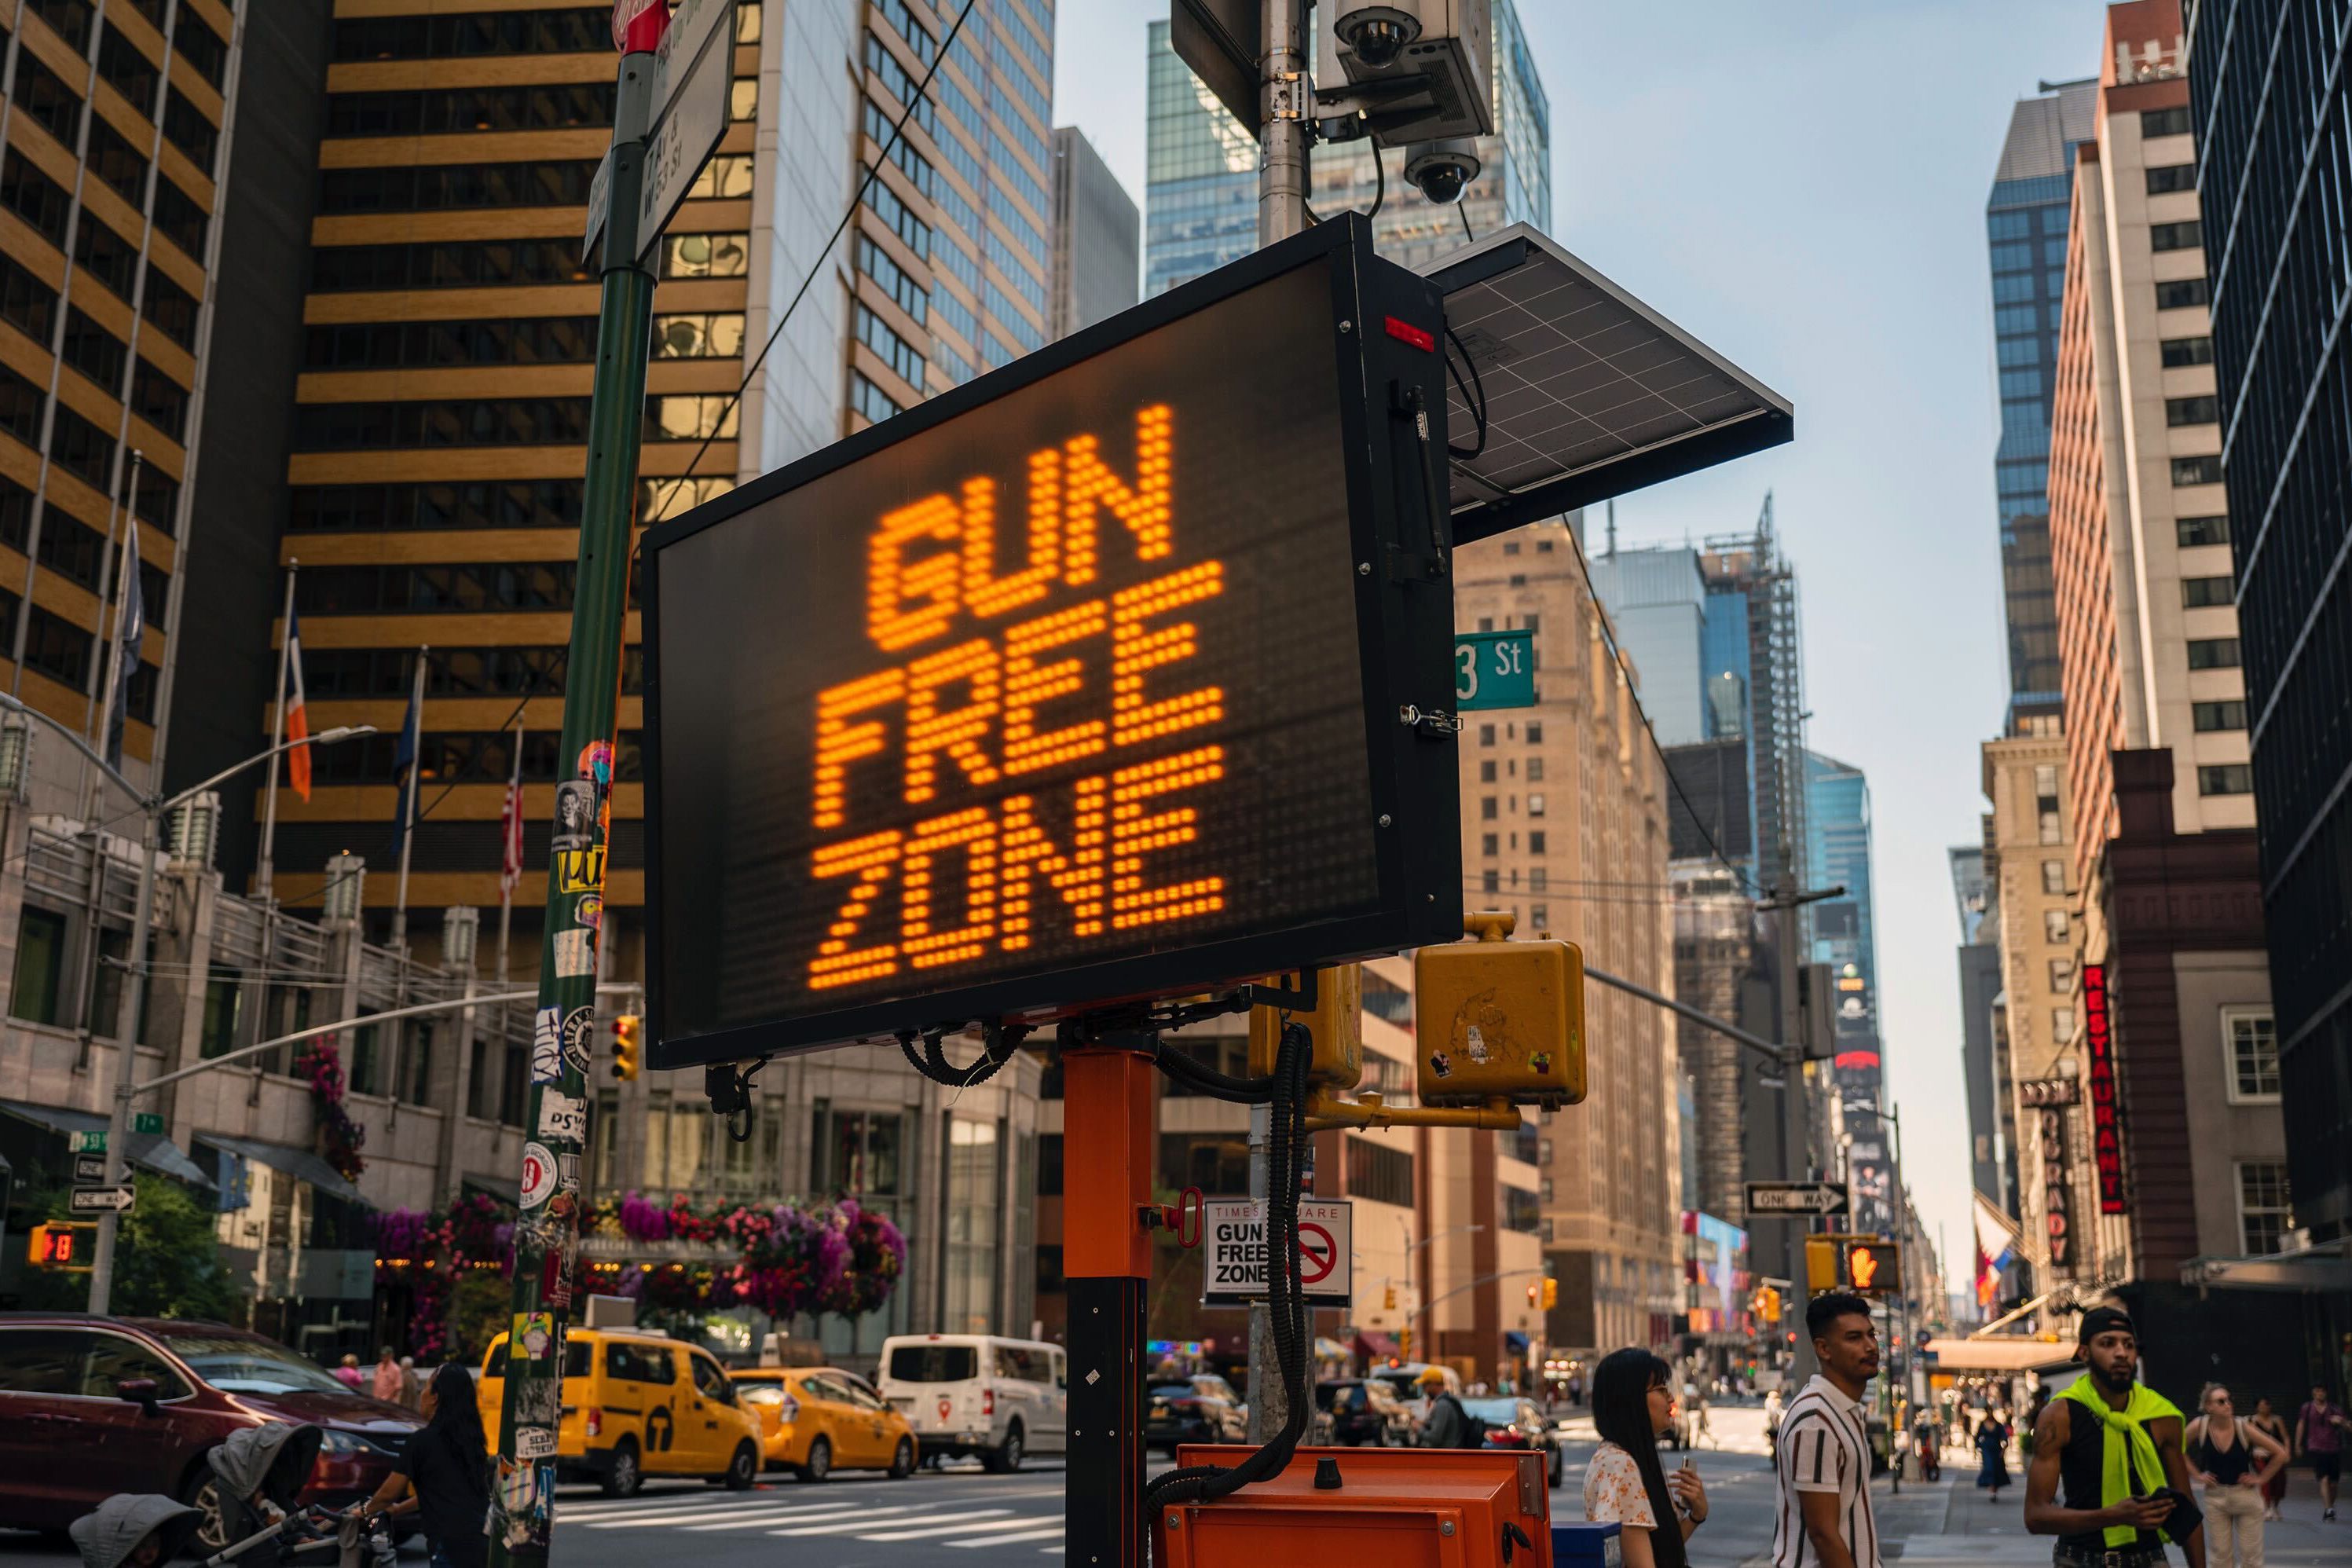 A large electronic traffic sign at the intersection of 7th Avenue and 53rd Street warns people about carrying weapons into the Times Square area, Sept. 2, 2022.